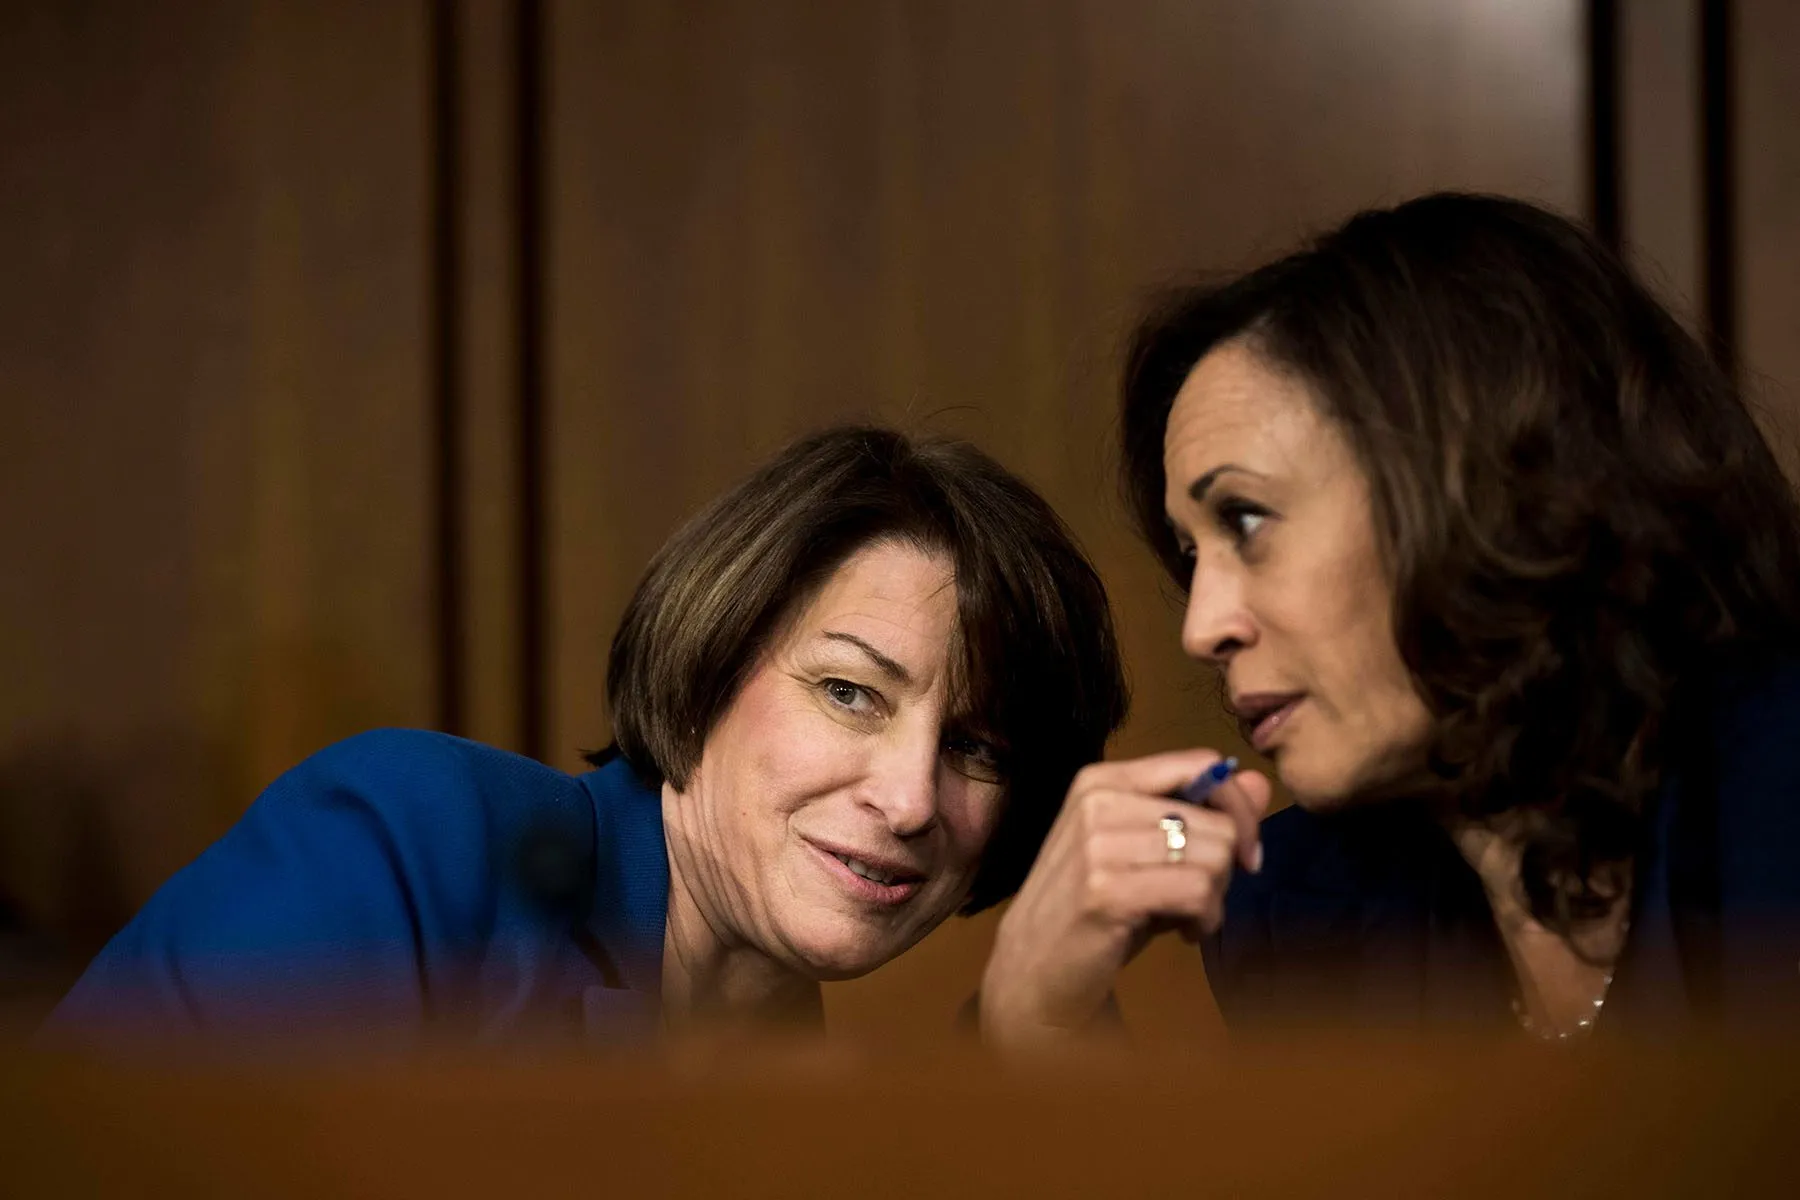 Amy Klobuchar and Kamala Harris speak quietly to each other during the Kavanaugh hearings.